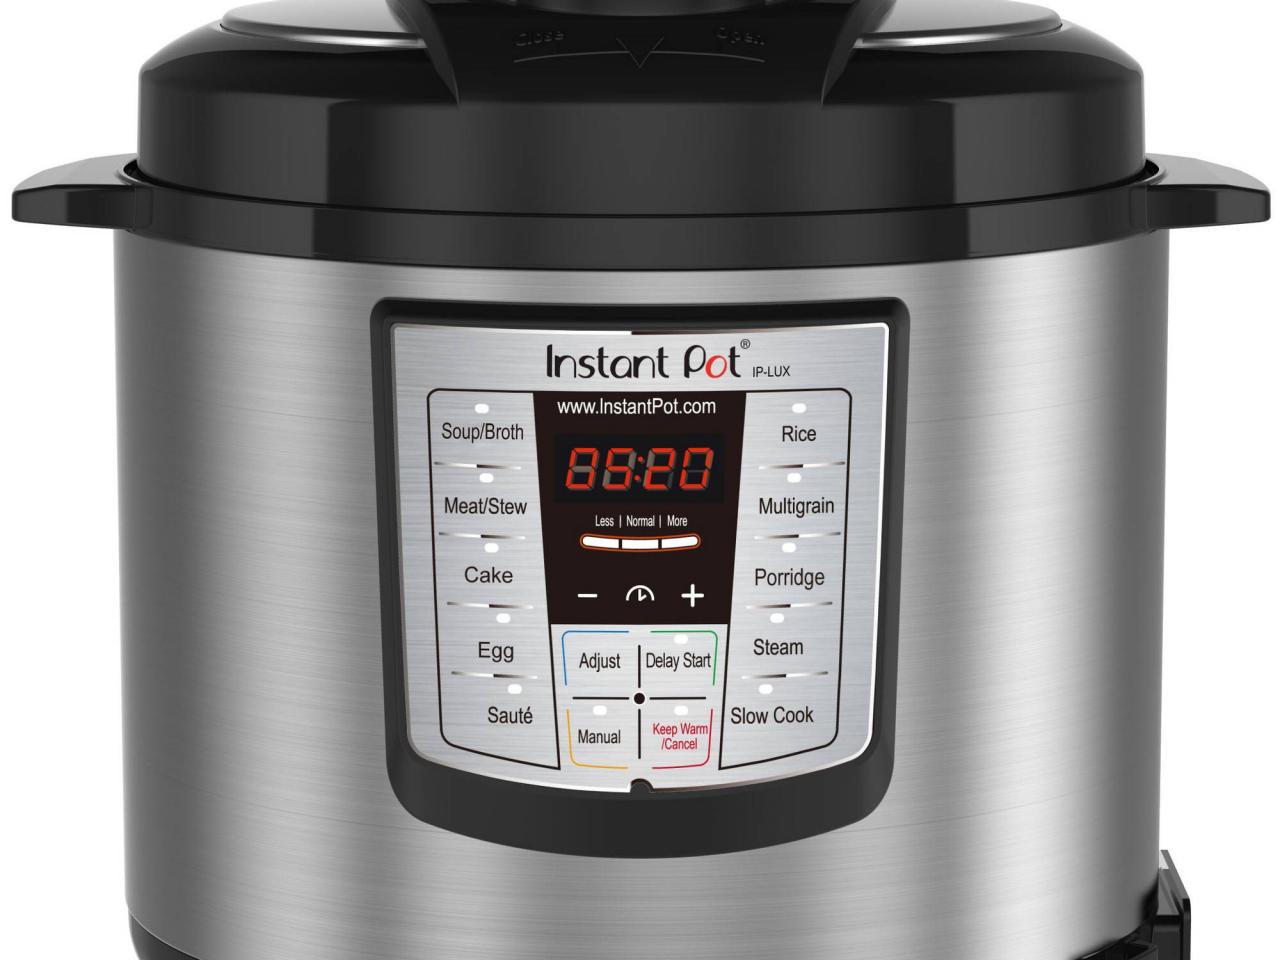 https://food.fnr.sndimg.com/content/dam/images/food/products/2019/8/19/rx_instant-pot-lux60-v3-6-qt-6-in-1-multi-use-programmable-pressure-cooker-slow-cooker-rice-cooker-saut-steamer-and-warmer.jpeg.rend.hgtvcom.1280.960.suffix/1566228099373.jpeg